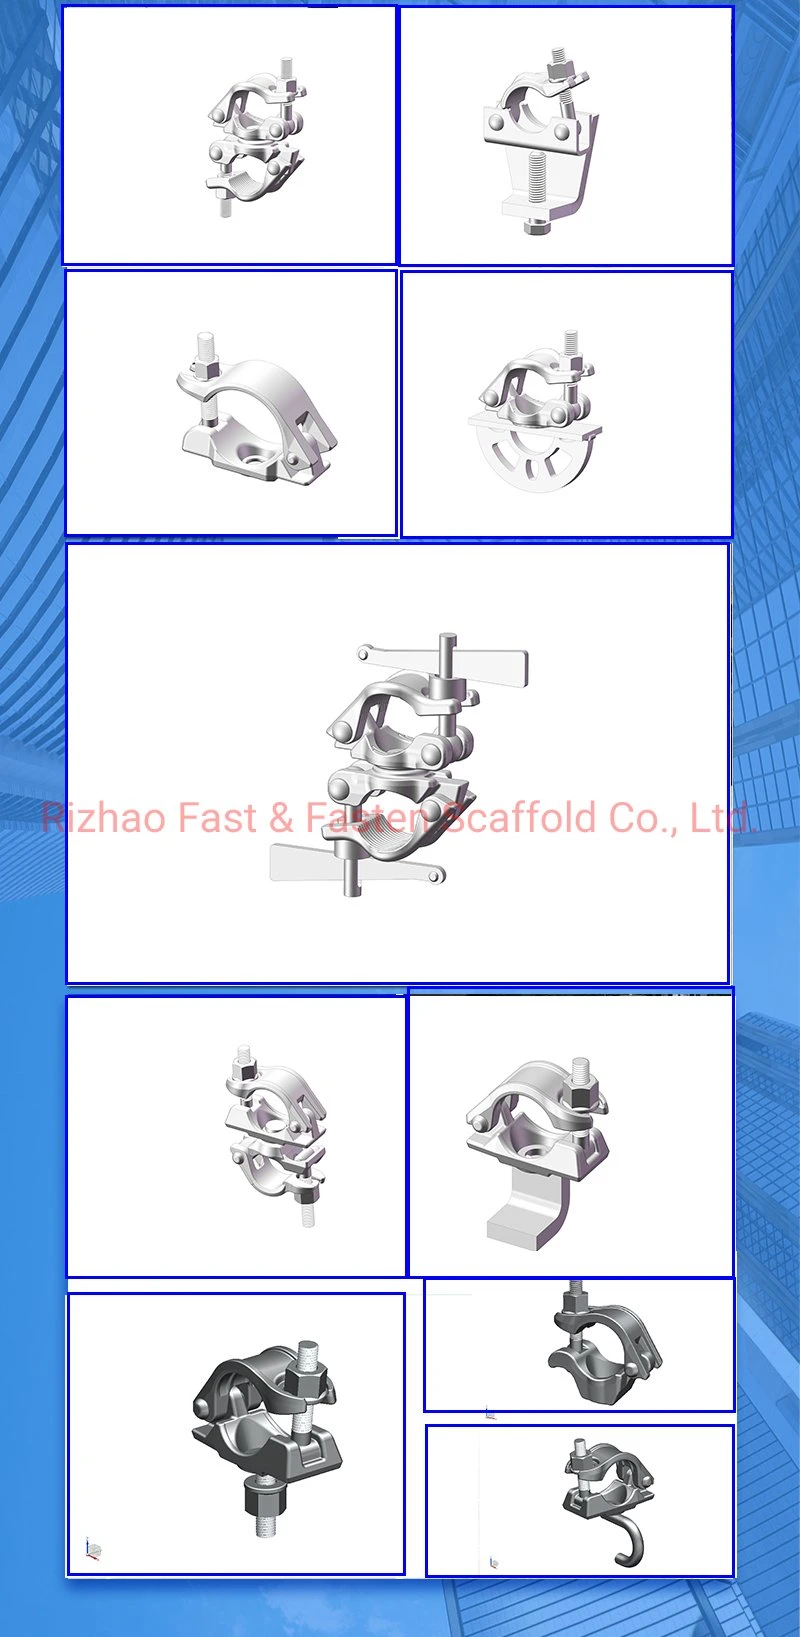 Top Sale Swivel Clamp Double Coupler Scaffolding Scaffold Prop Swivel Couplers Coupler Clamps Parts Fittings